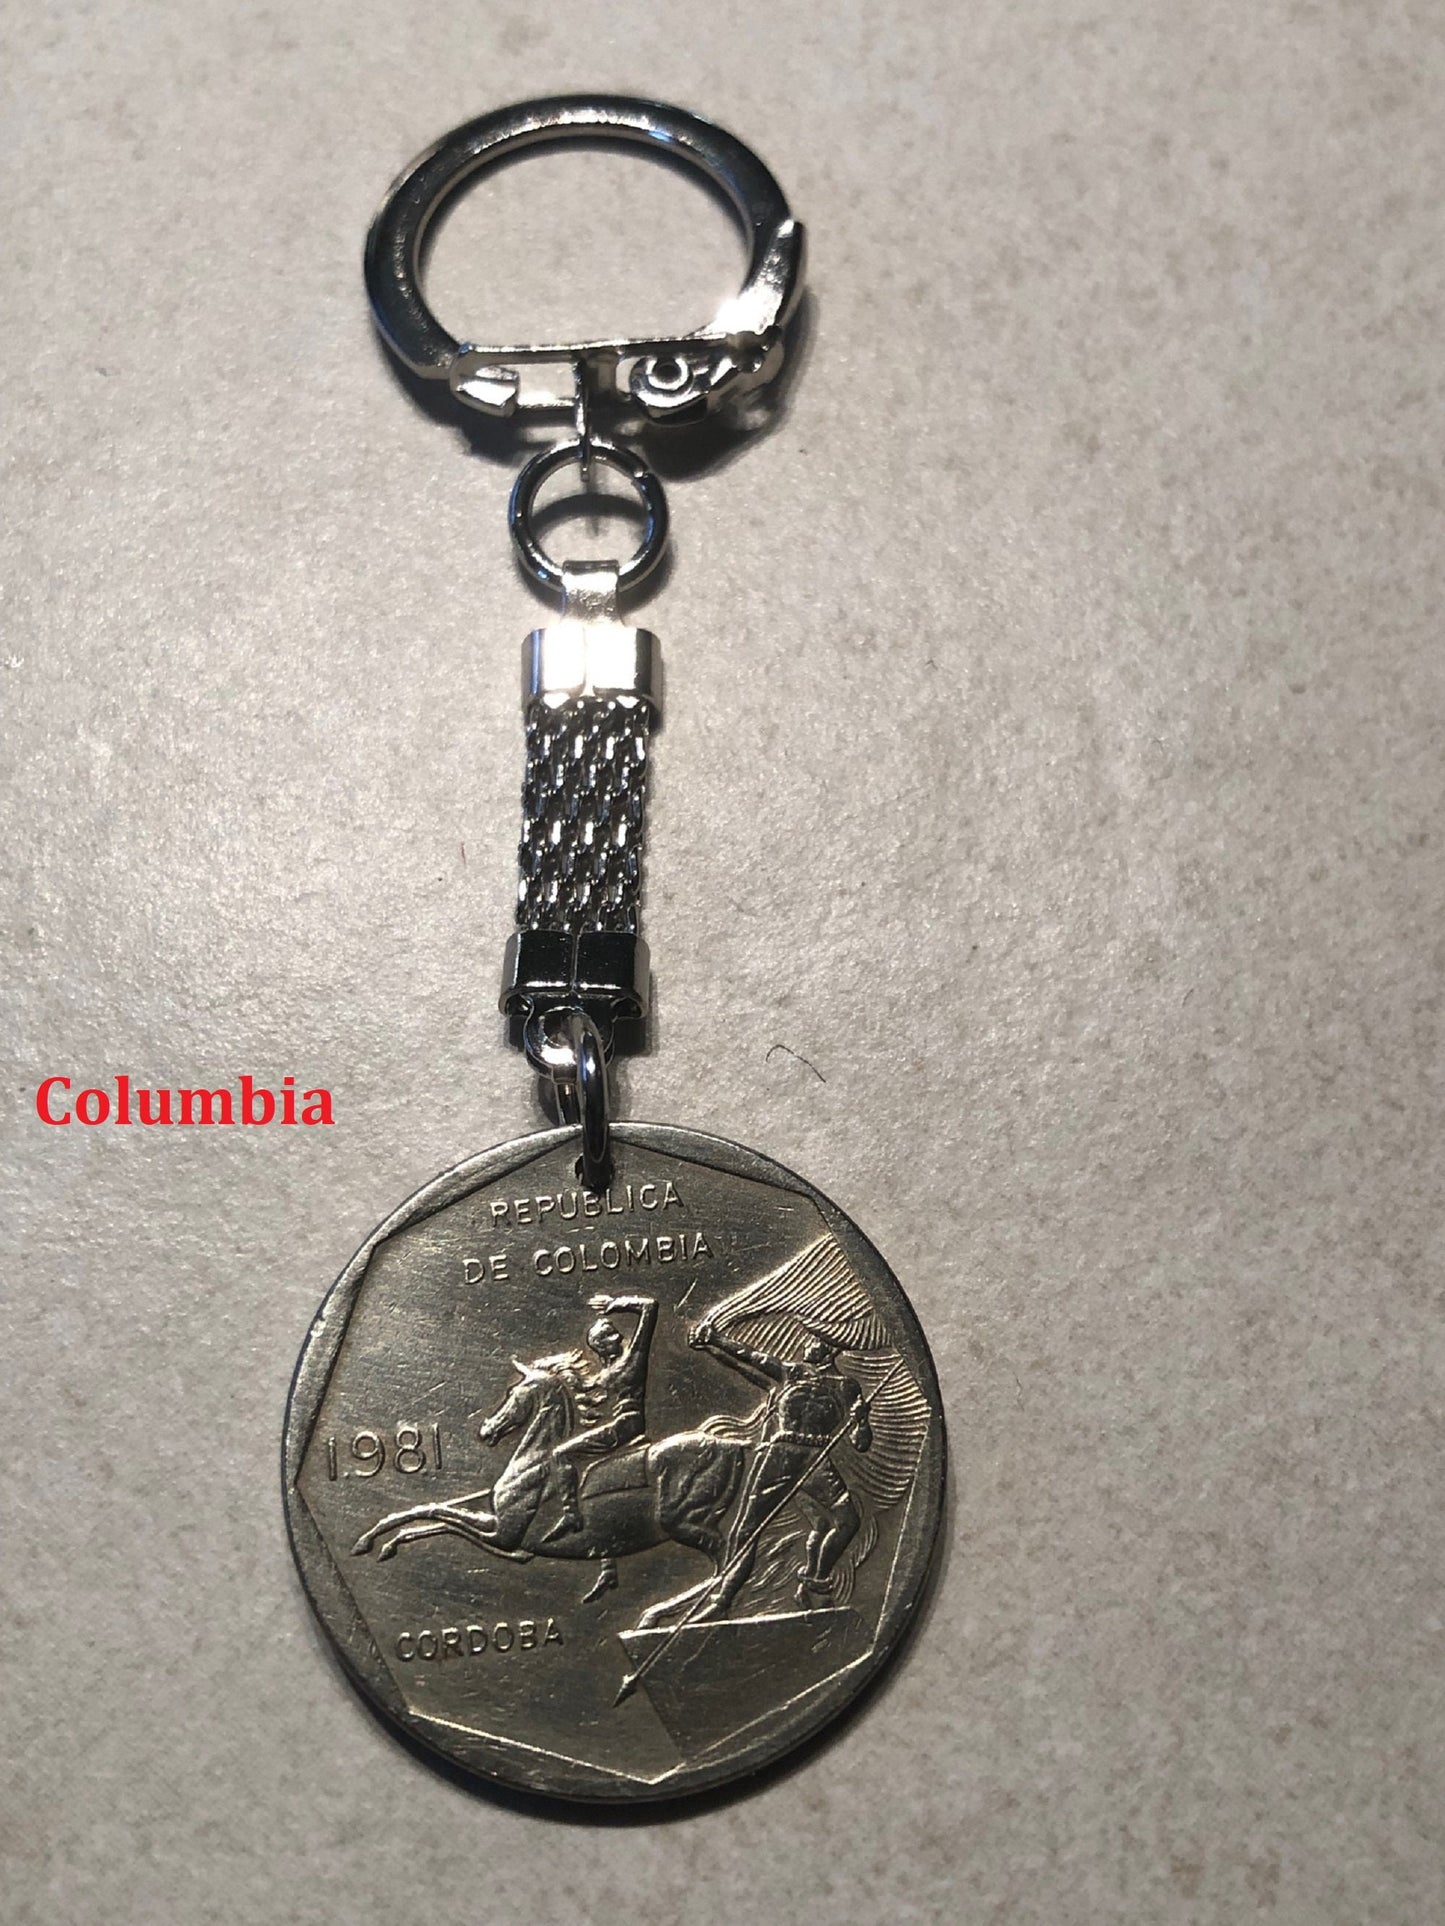 Coin Keychain Philippines - Bailiwick of Jersey - Columbia - Venezuela Vintage One of a Kind Rare Find Vintage Handmade